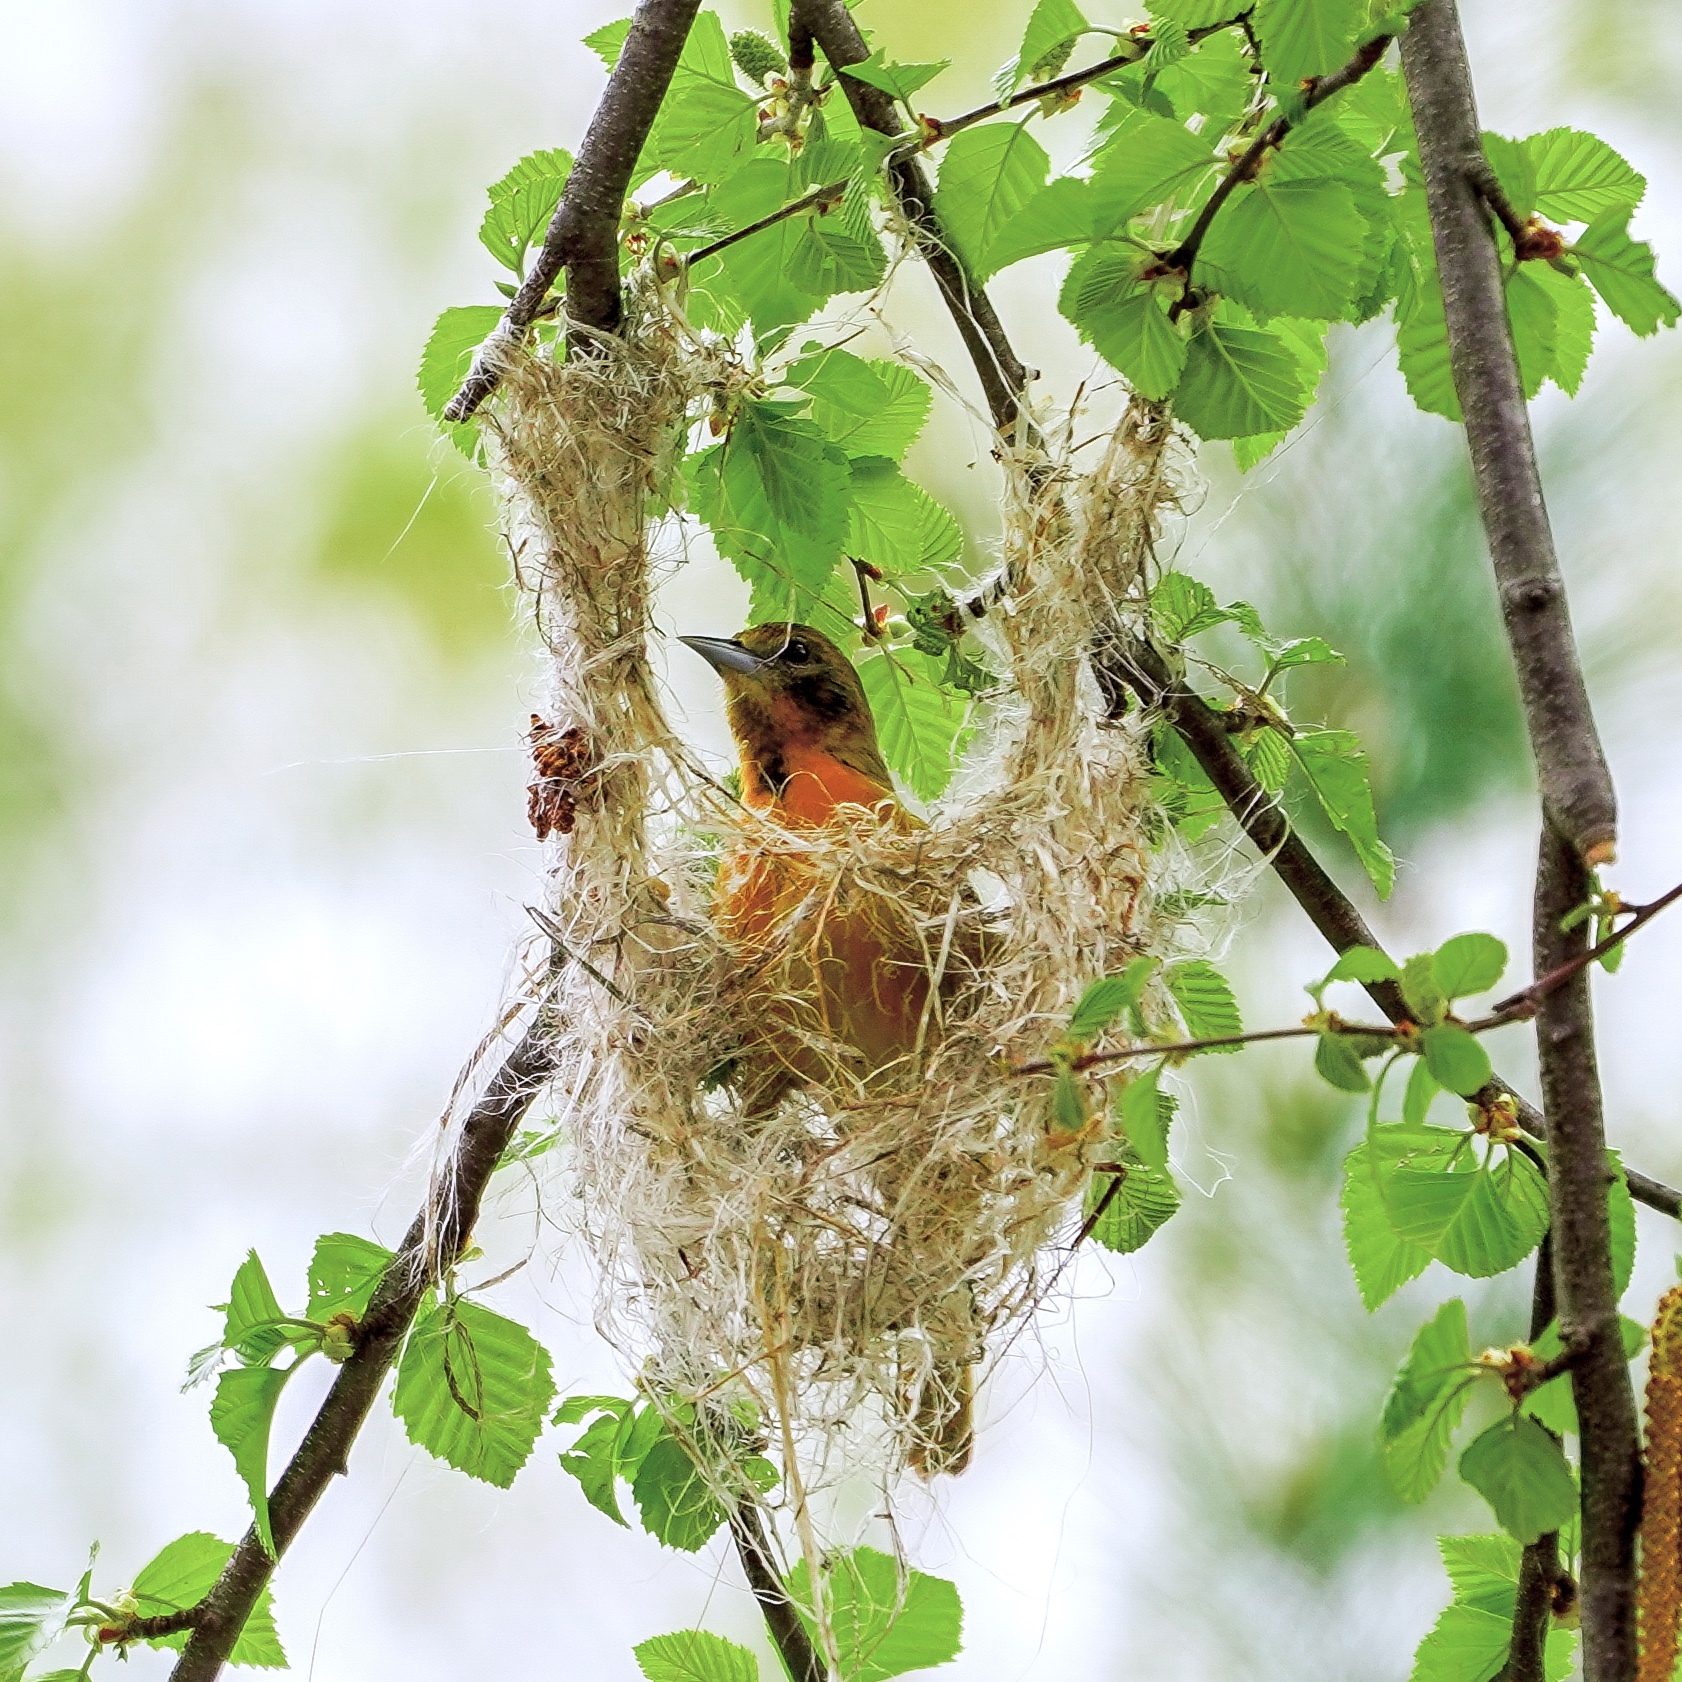 The Baltimore Oriole nests in all five boroughs and is a common breeding bird in Van Cortlandt Park. <a href="https://www.flickr.com/photos/johnanes/41372537174/" target="_blank">Photo</a>: John Anes/<a href="https://creativecommons.org/licenses/by-sa/2.0/" target="_blank" >CC BY-SA 2.0</a>